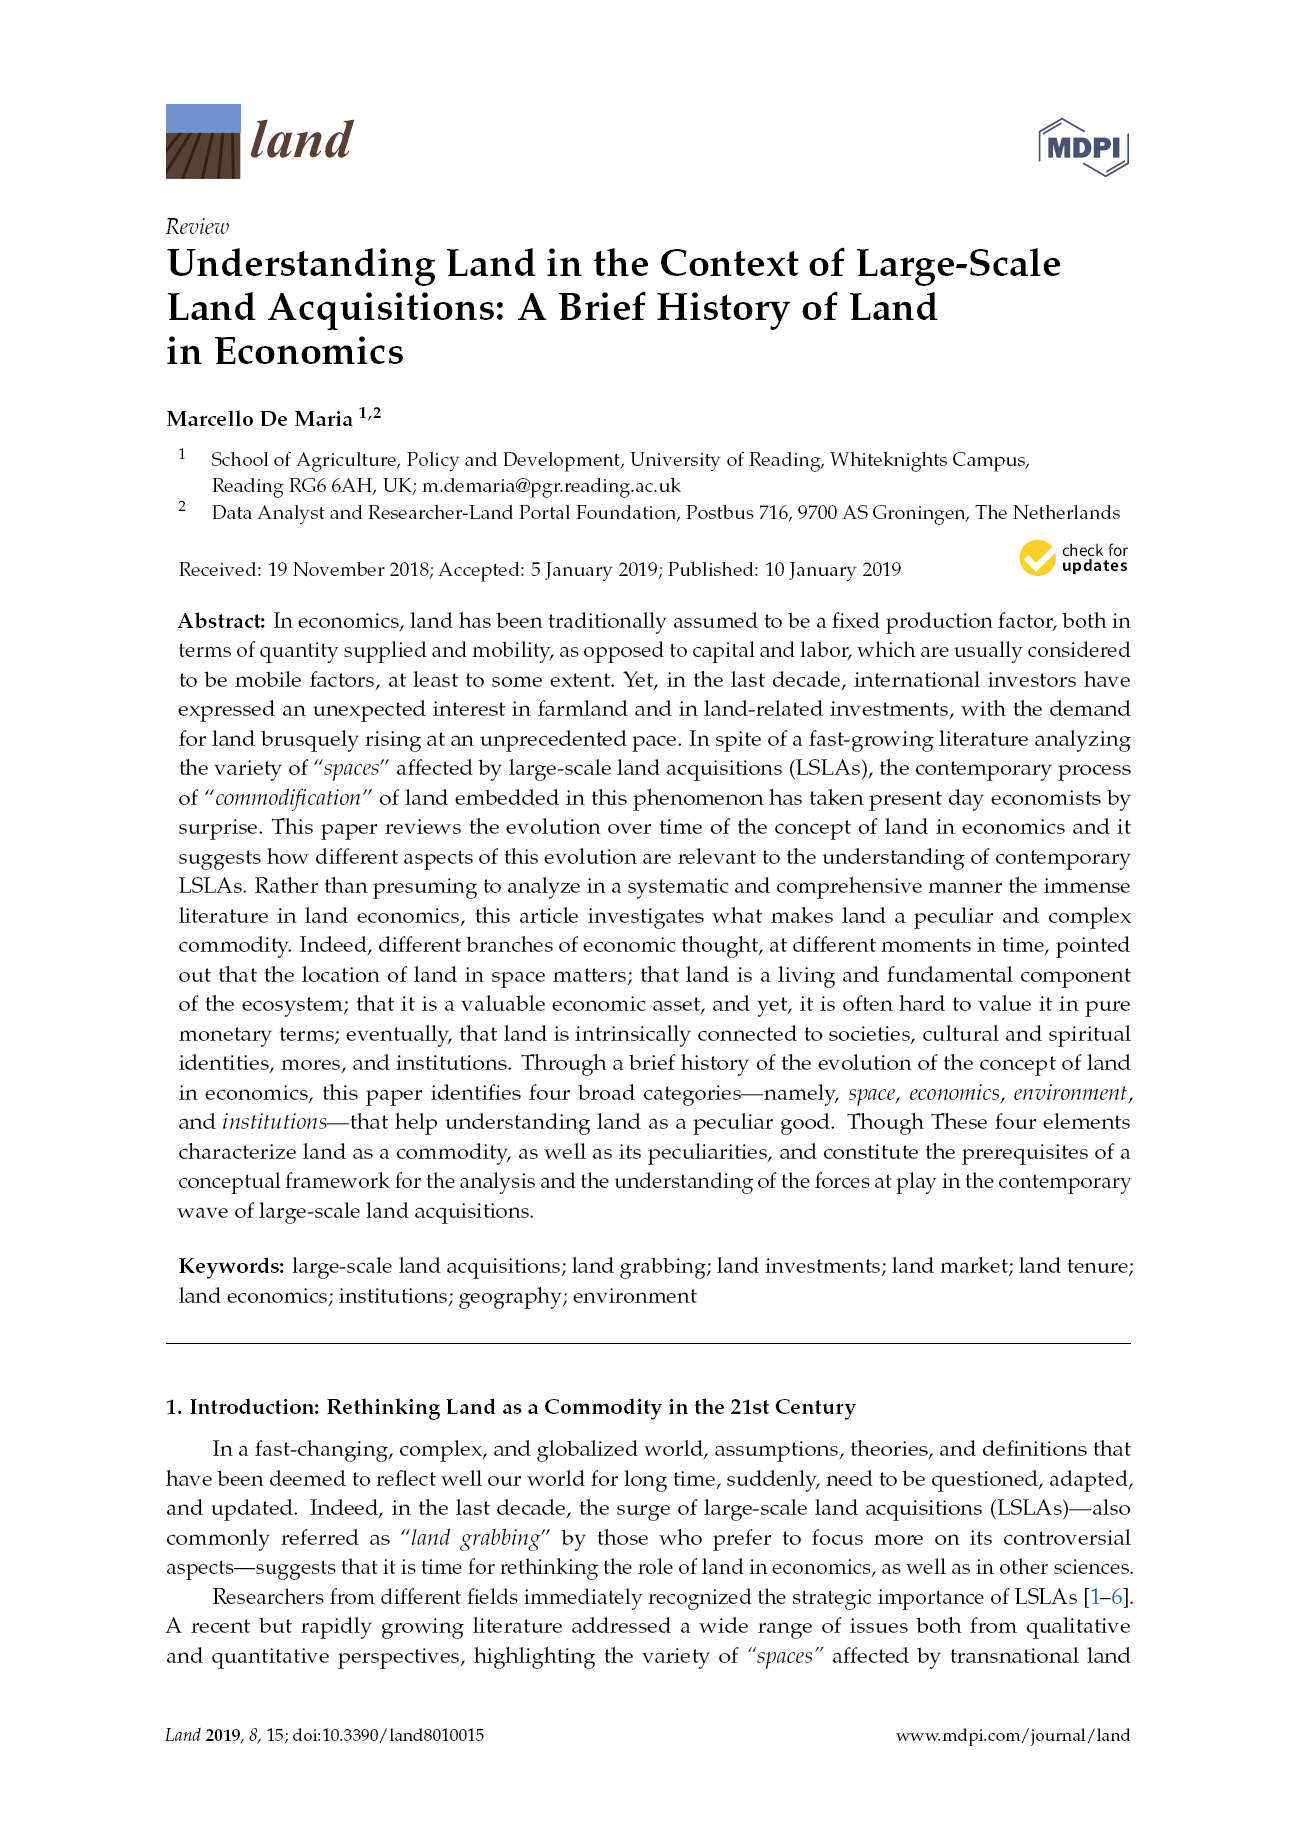 Understanding Land in the Context of Large-Scale Land Acquisitions: A Brief History of Land in Economics